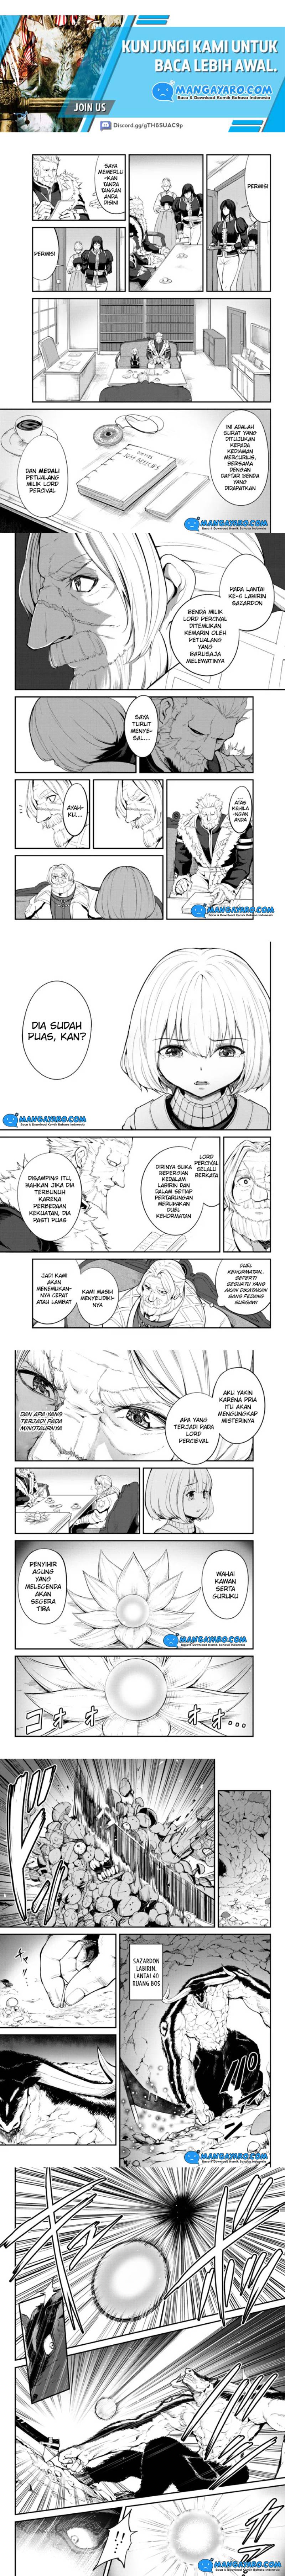 King of the Labyrinth Chapter 08.2